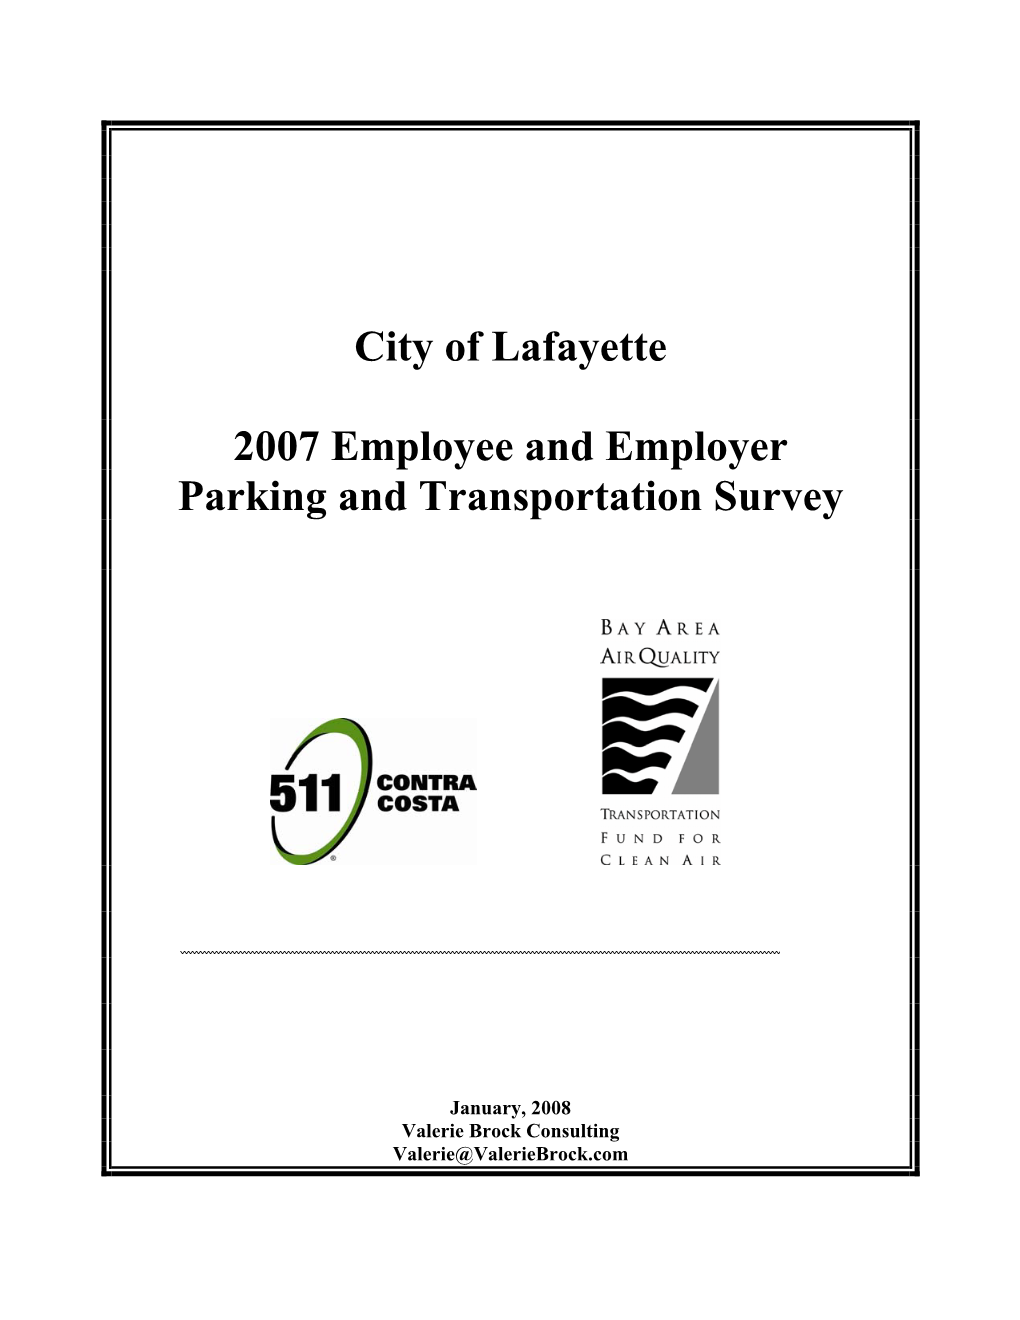 City of Lafayette 2007 Employee and Employer Parking And